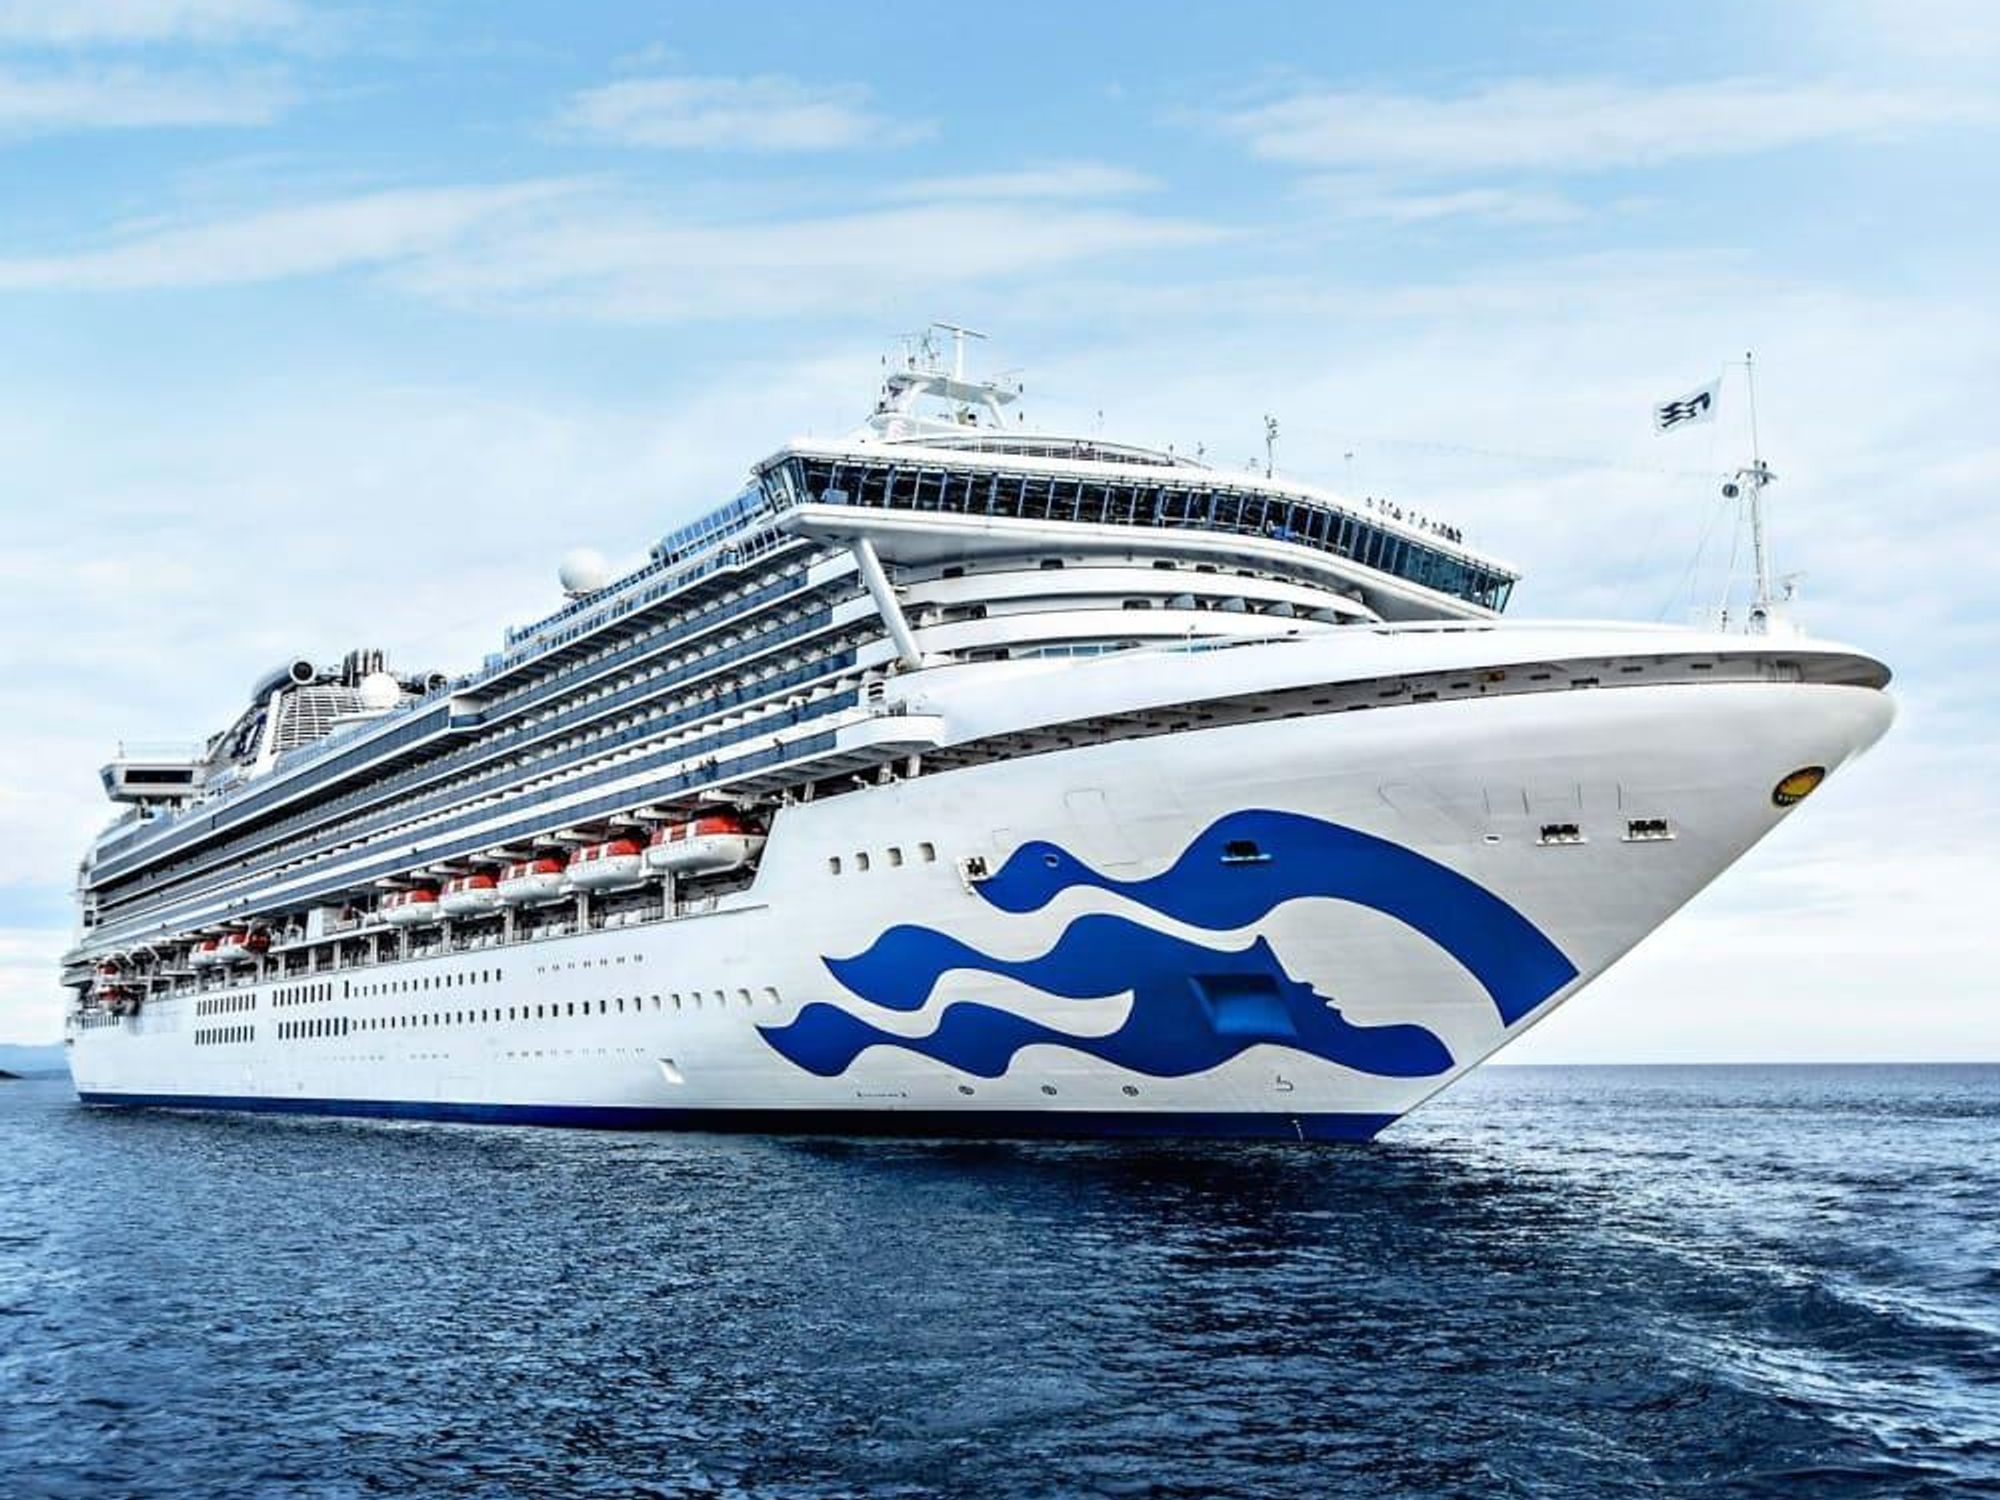 Princess cruises back into Galveston with new voyages to sunny locales